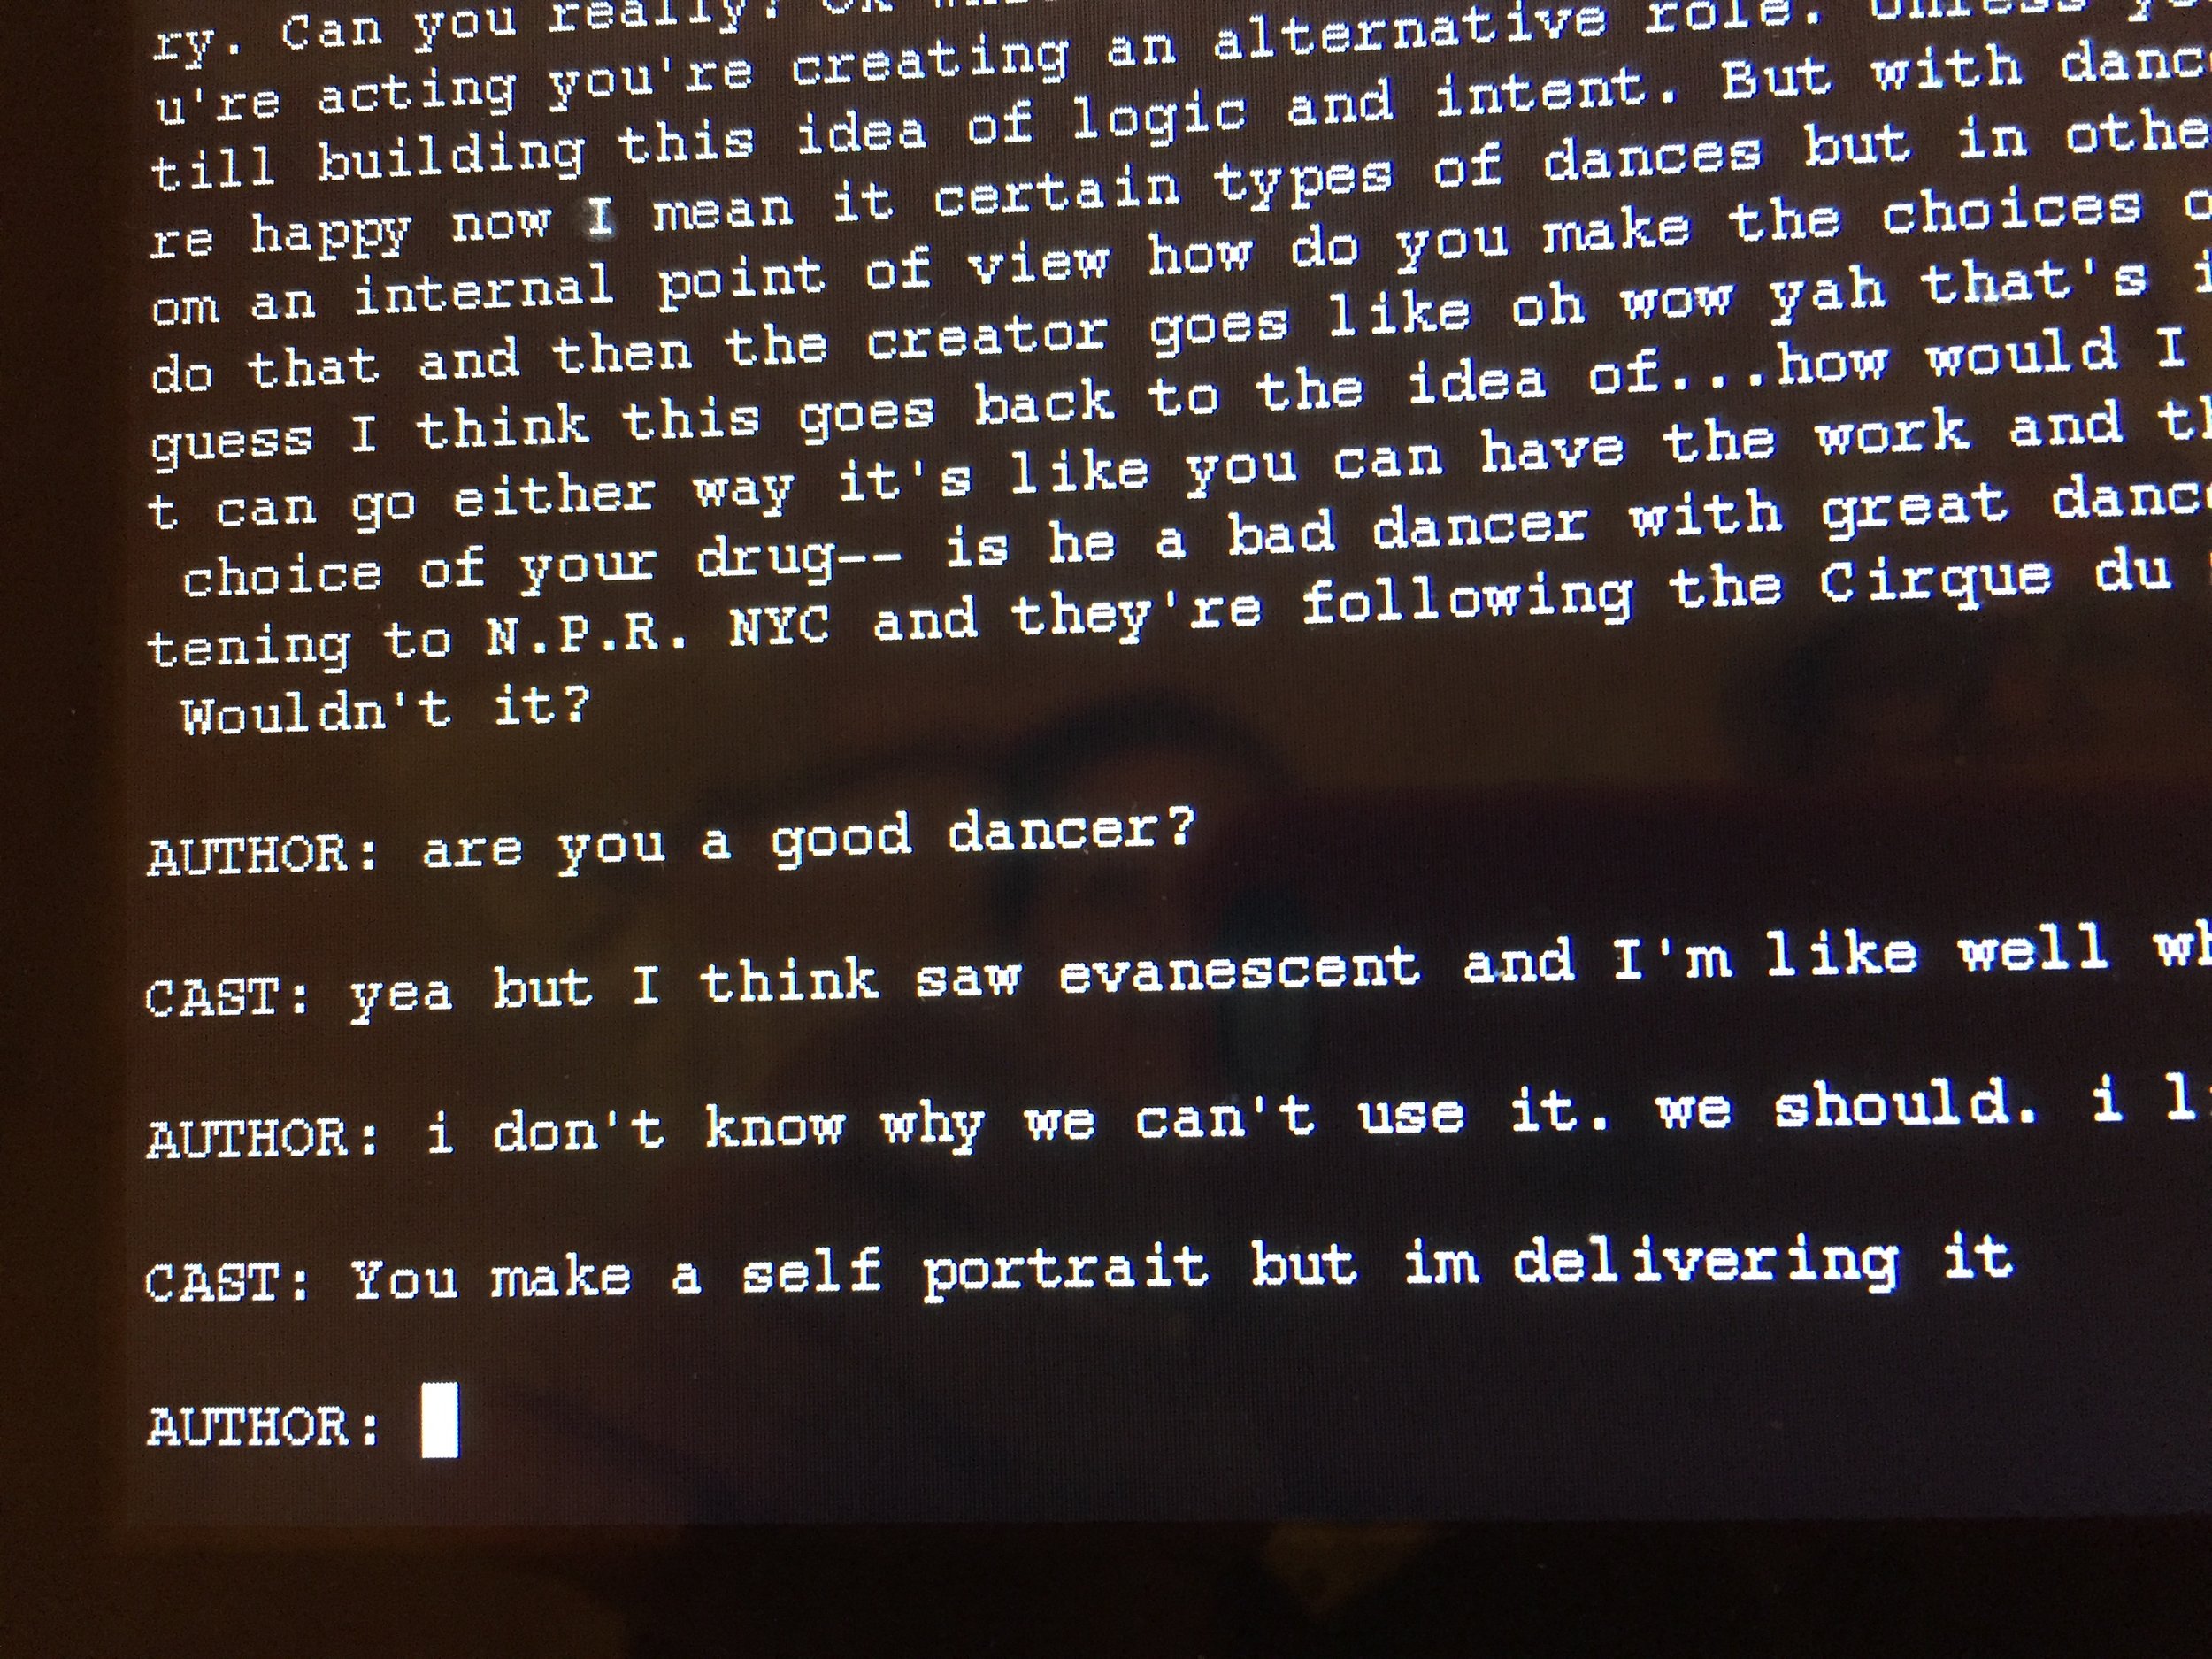 White monospaced text showing a conversation between “Author” and “Cast” on a black background.